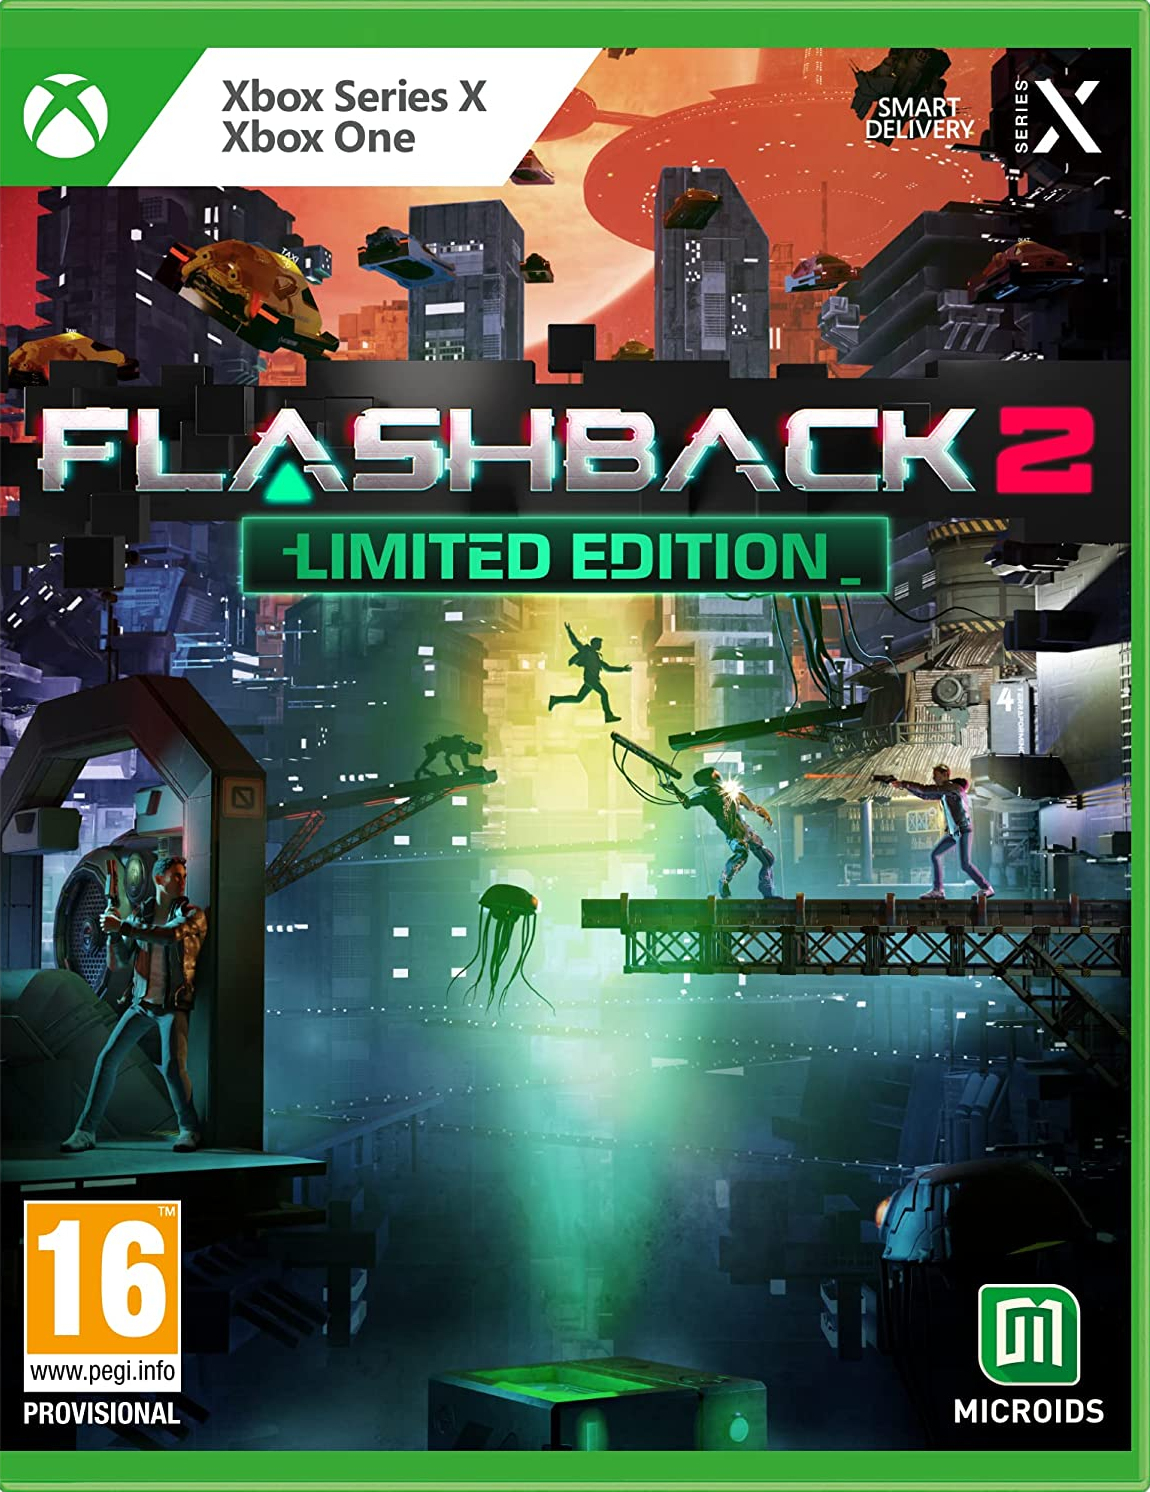 Flashback 2 will arrive in December and will have a special edition